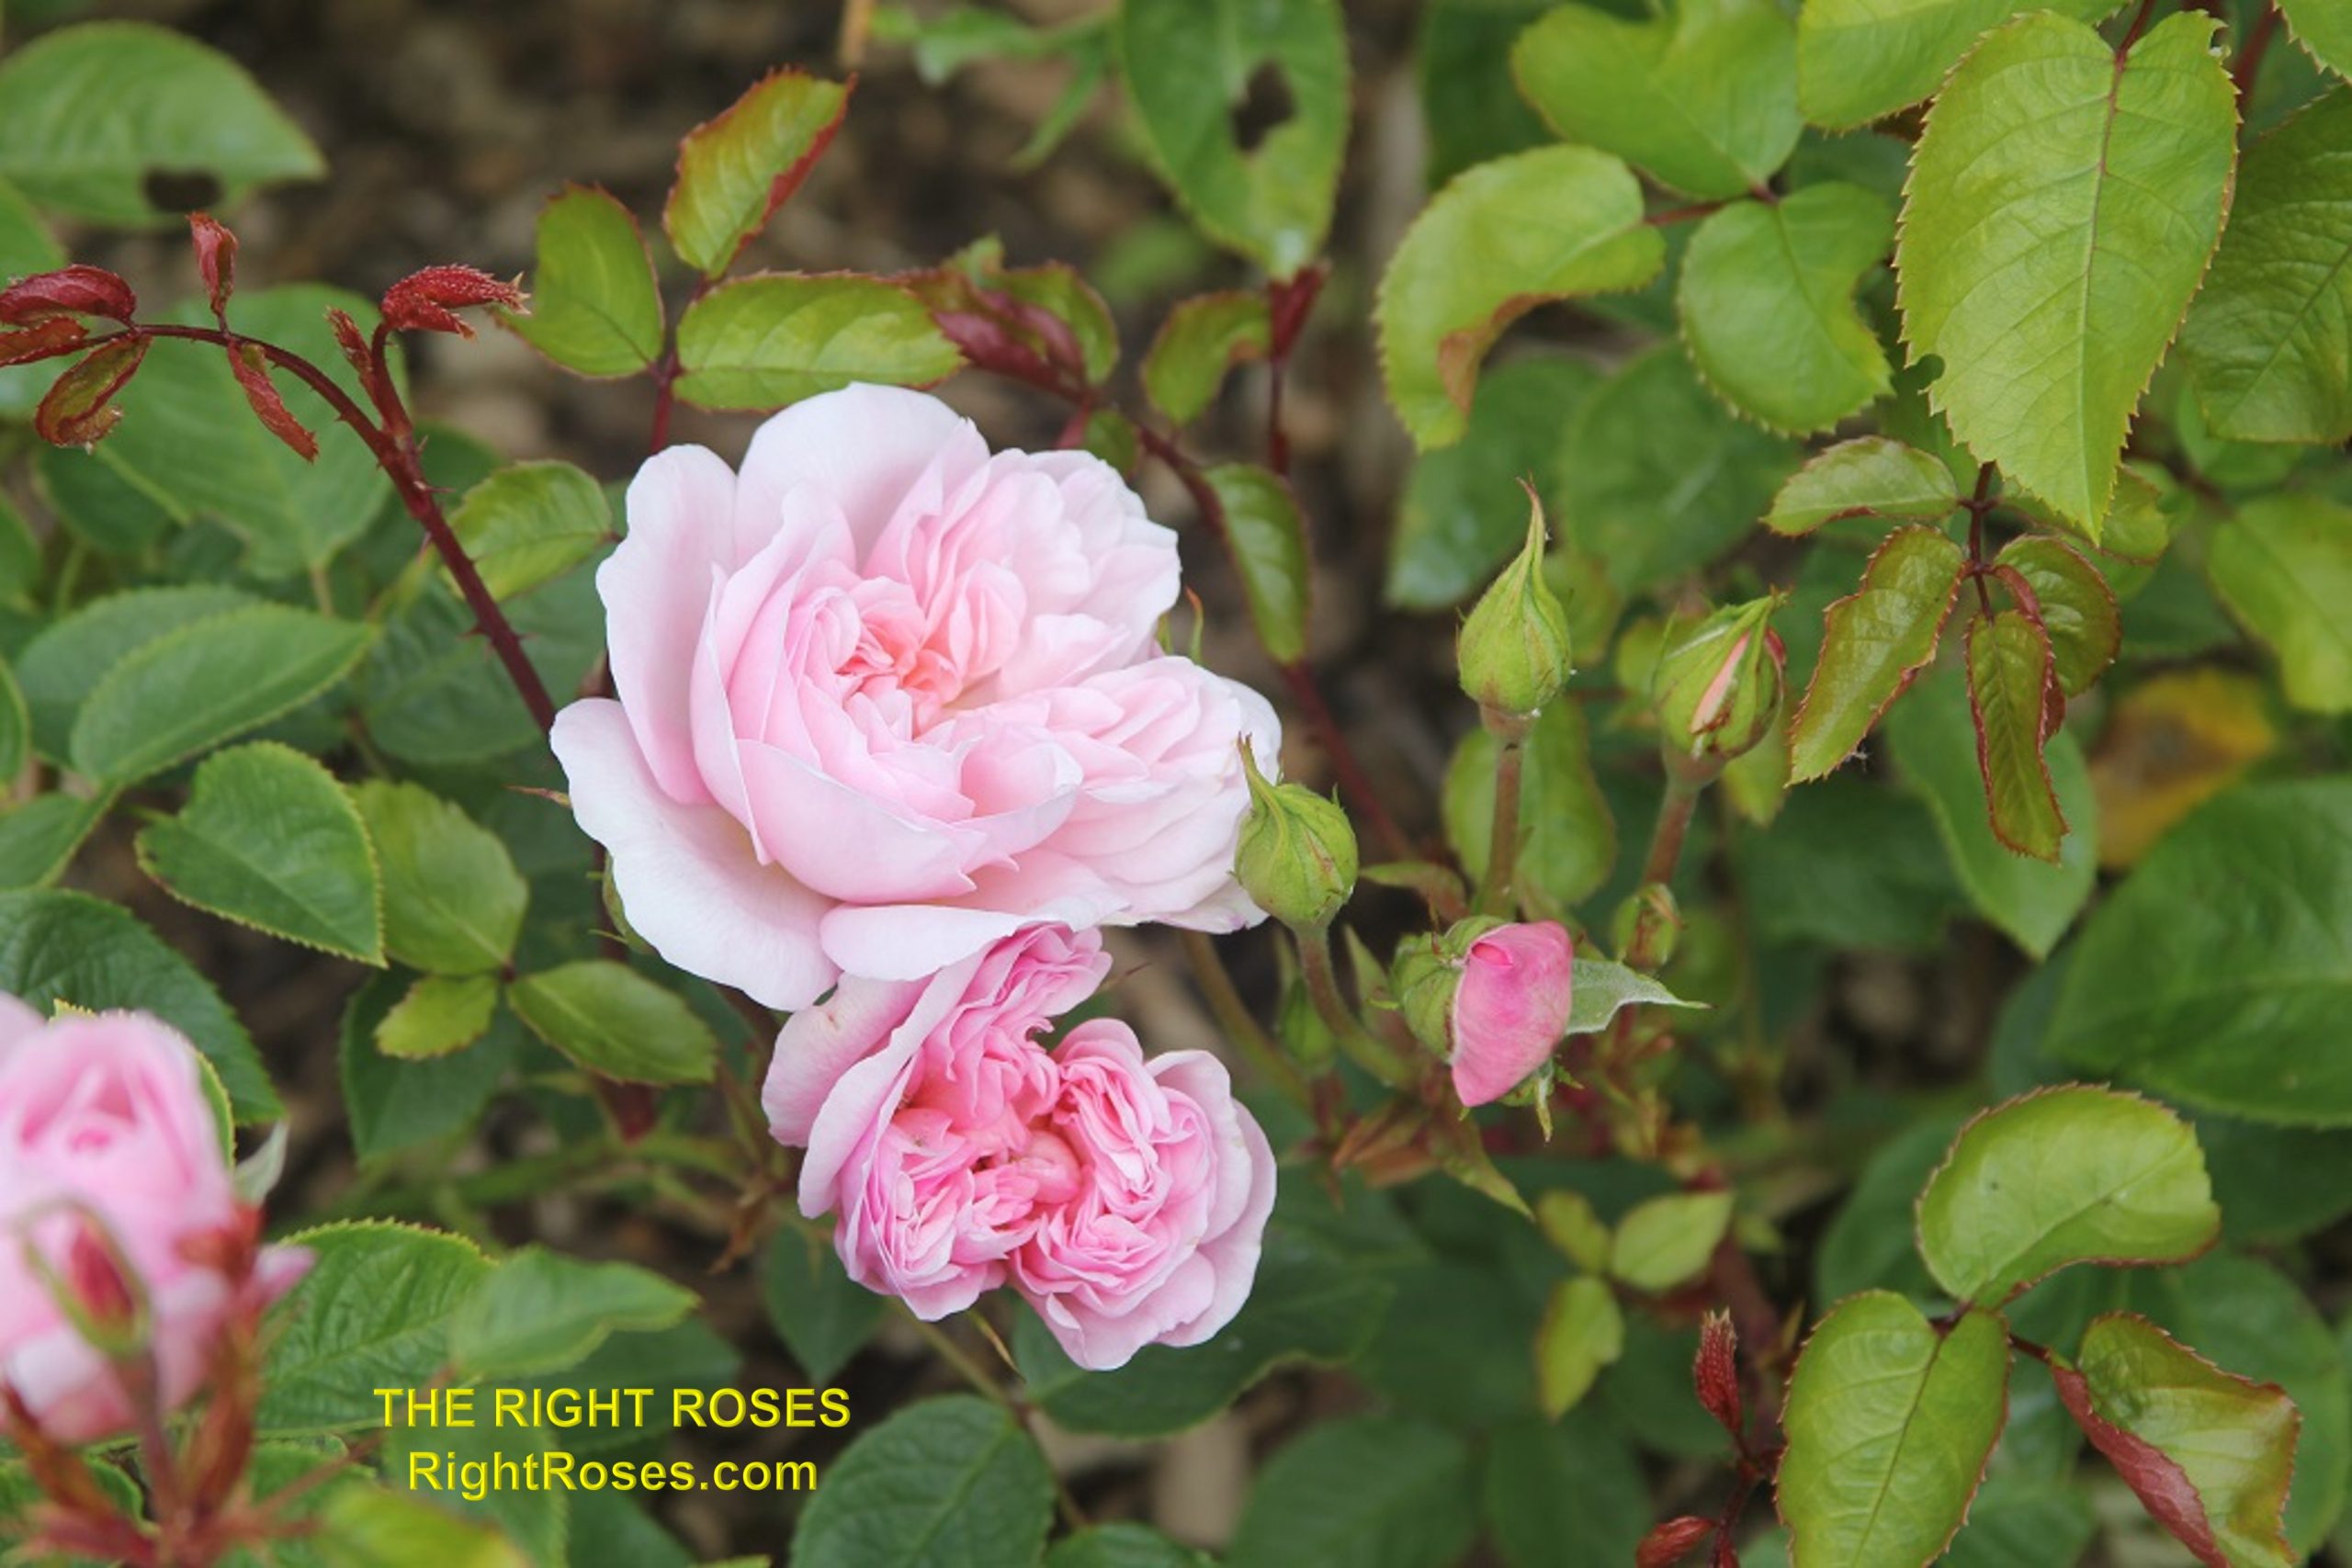 The Right Roses presents you with the best rose review of rose Elizabeth | David Austin Roses 2022. Millions of gardeners from all over the world have trusted our in-depth reviews. The Right Roses team uses our own, bespoke The Right Roses Score, which is the most comprehensive rose rating system in the world, to assess the overall quality of a rose. We review all the very best roses from all the best rose breeders such as Rosen Kordes, Rosen Tantau, Delbard, David Austin Roses. The Right Roses is also running the best gardening club for the very best connoisseur gardeners and garden designers at Righttify.com. At Righttify.com, connoisseur sellers can design gardens, provide gardening services, sell new garden plants, resell pre-loved garden plants. In addition, buyers can buy the very best plants in the world.